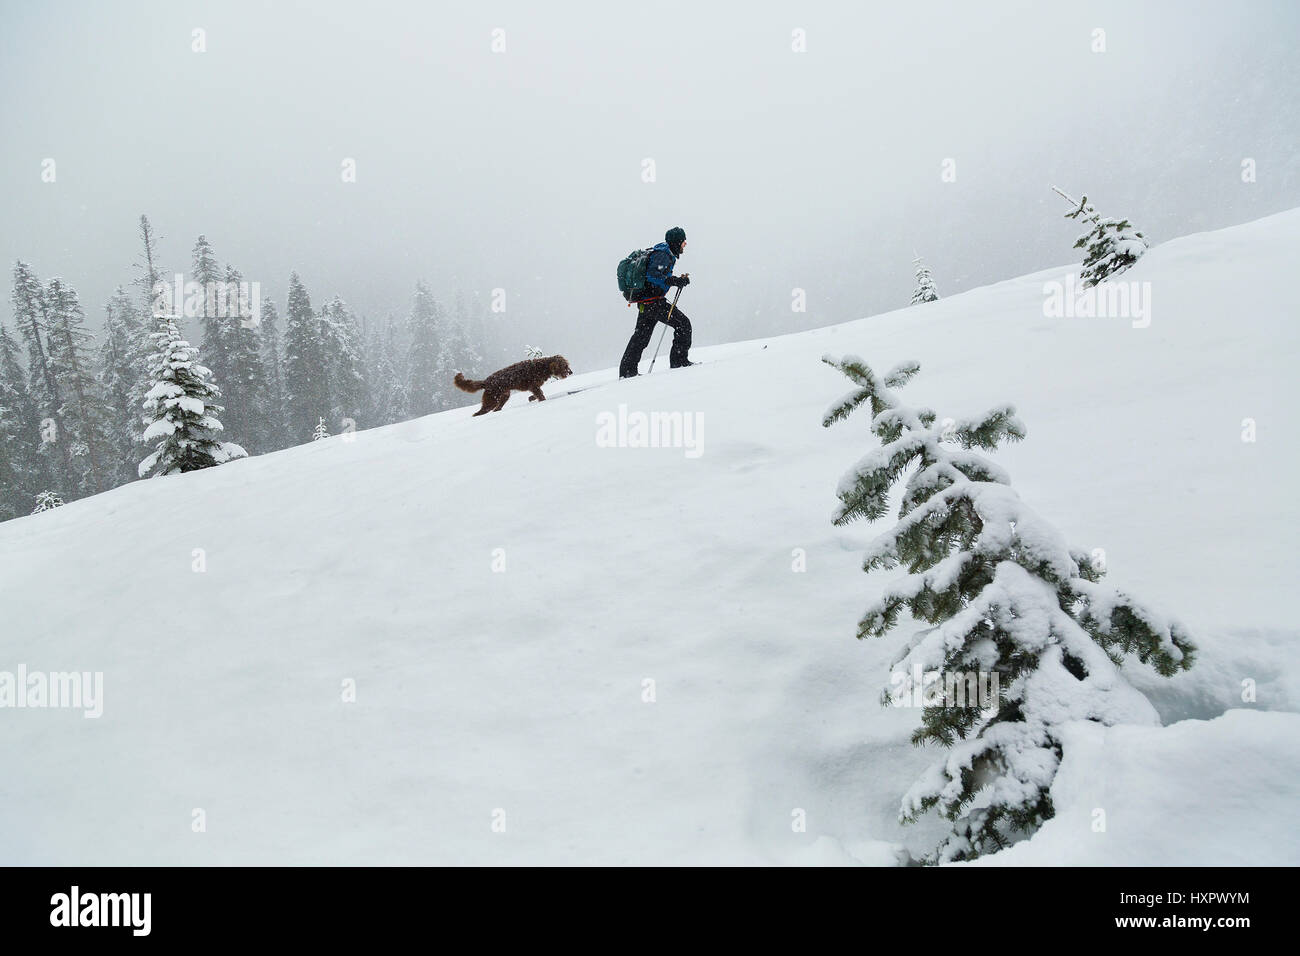 A skier and his dog ascending a slope on the flanks of Mount Hood, Oregon, United States. Stock Photo